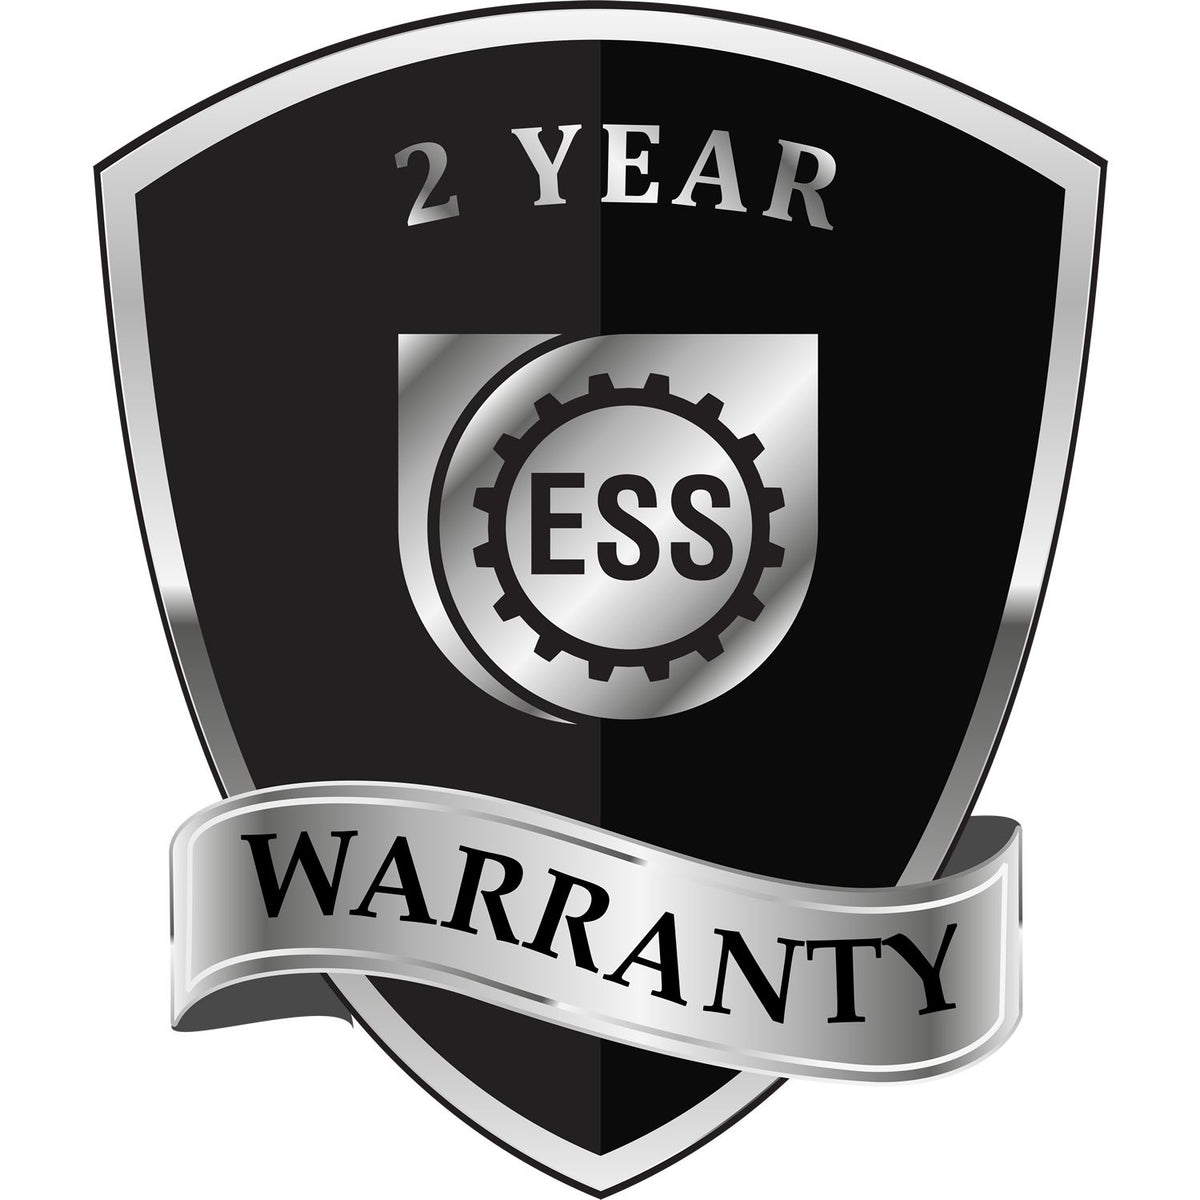 A black and silver badge or emblem showing warranty information for the Hybrid Alabama Engineer Seal